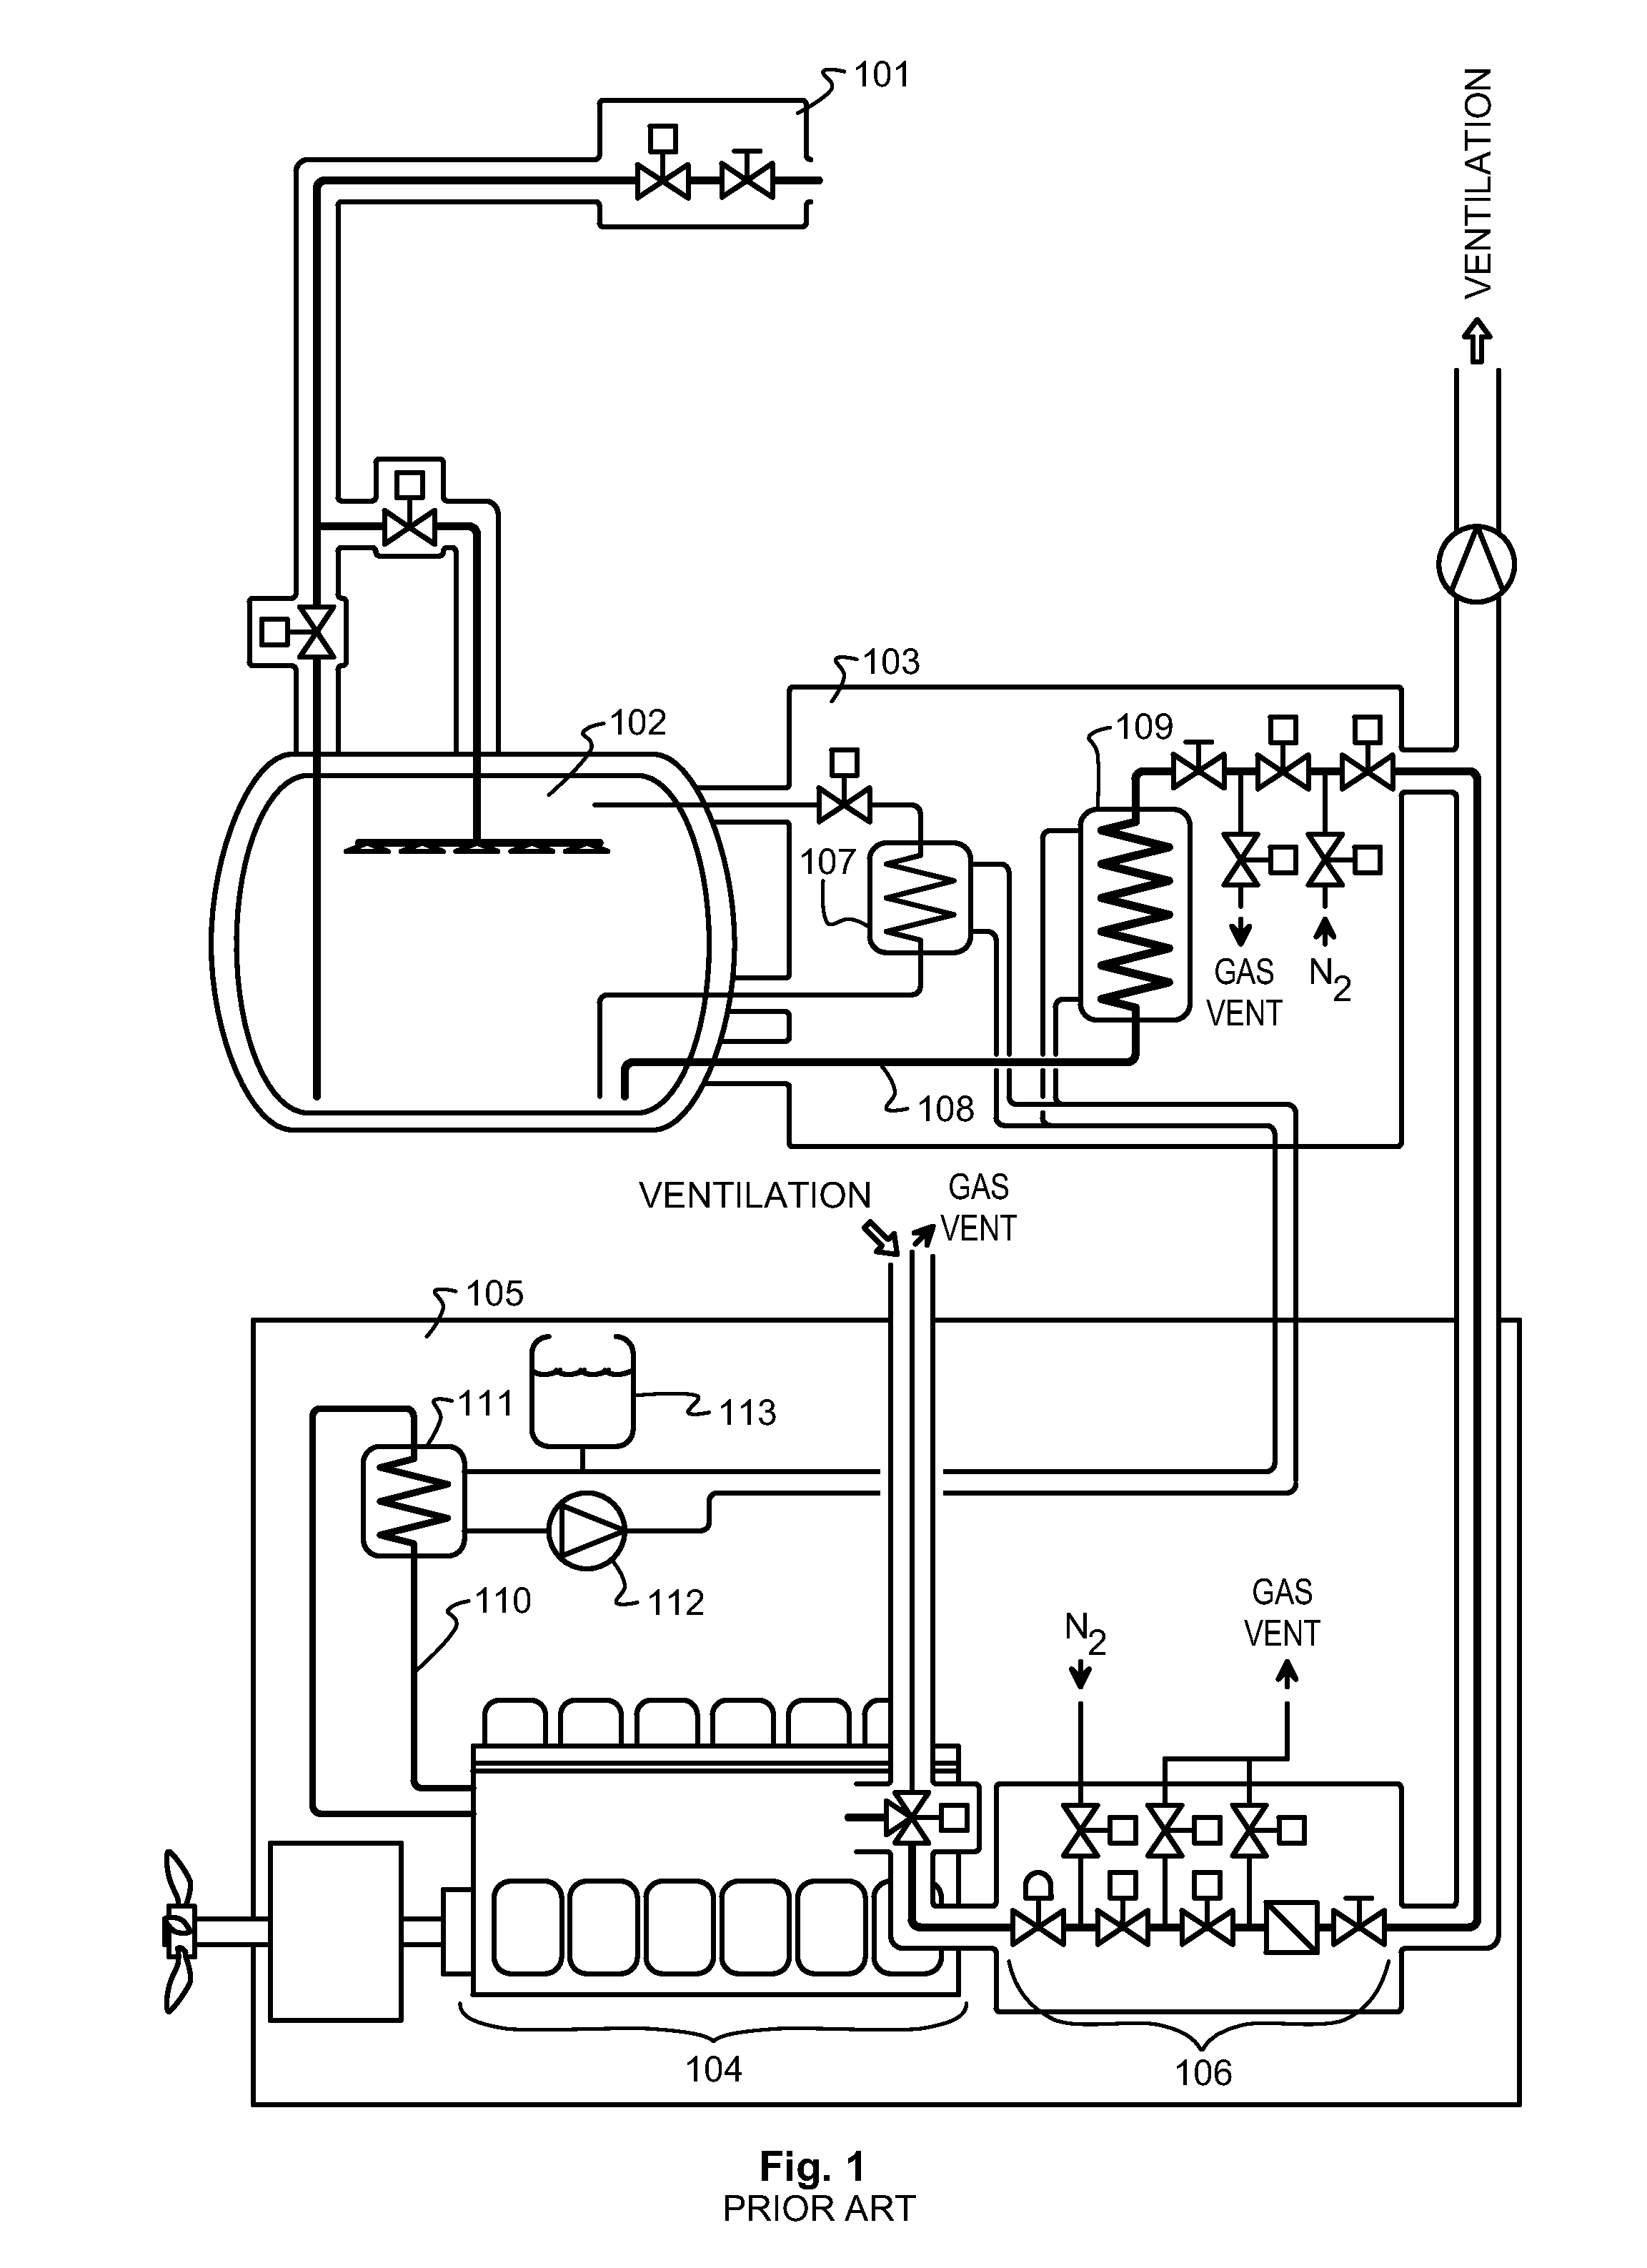 Method and arrangement for waste cold recovery in a gas-fuelled sea-going vessel